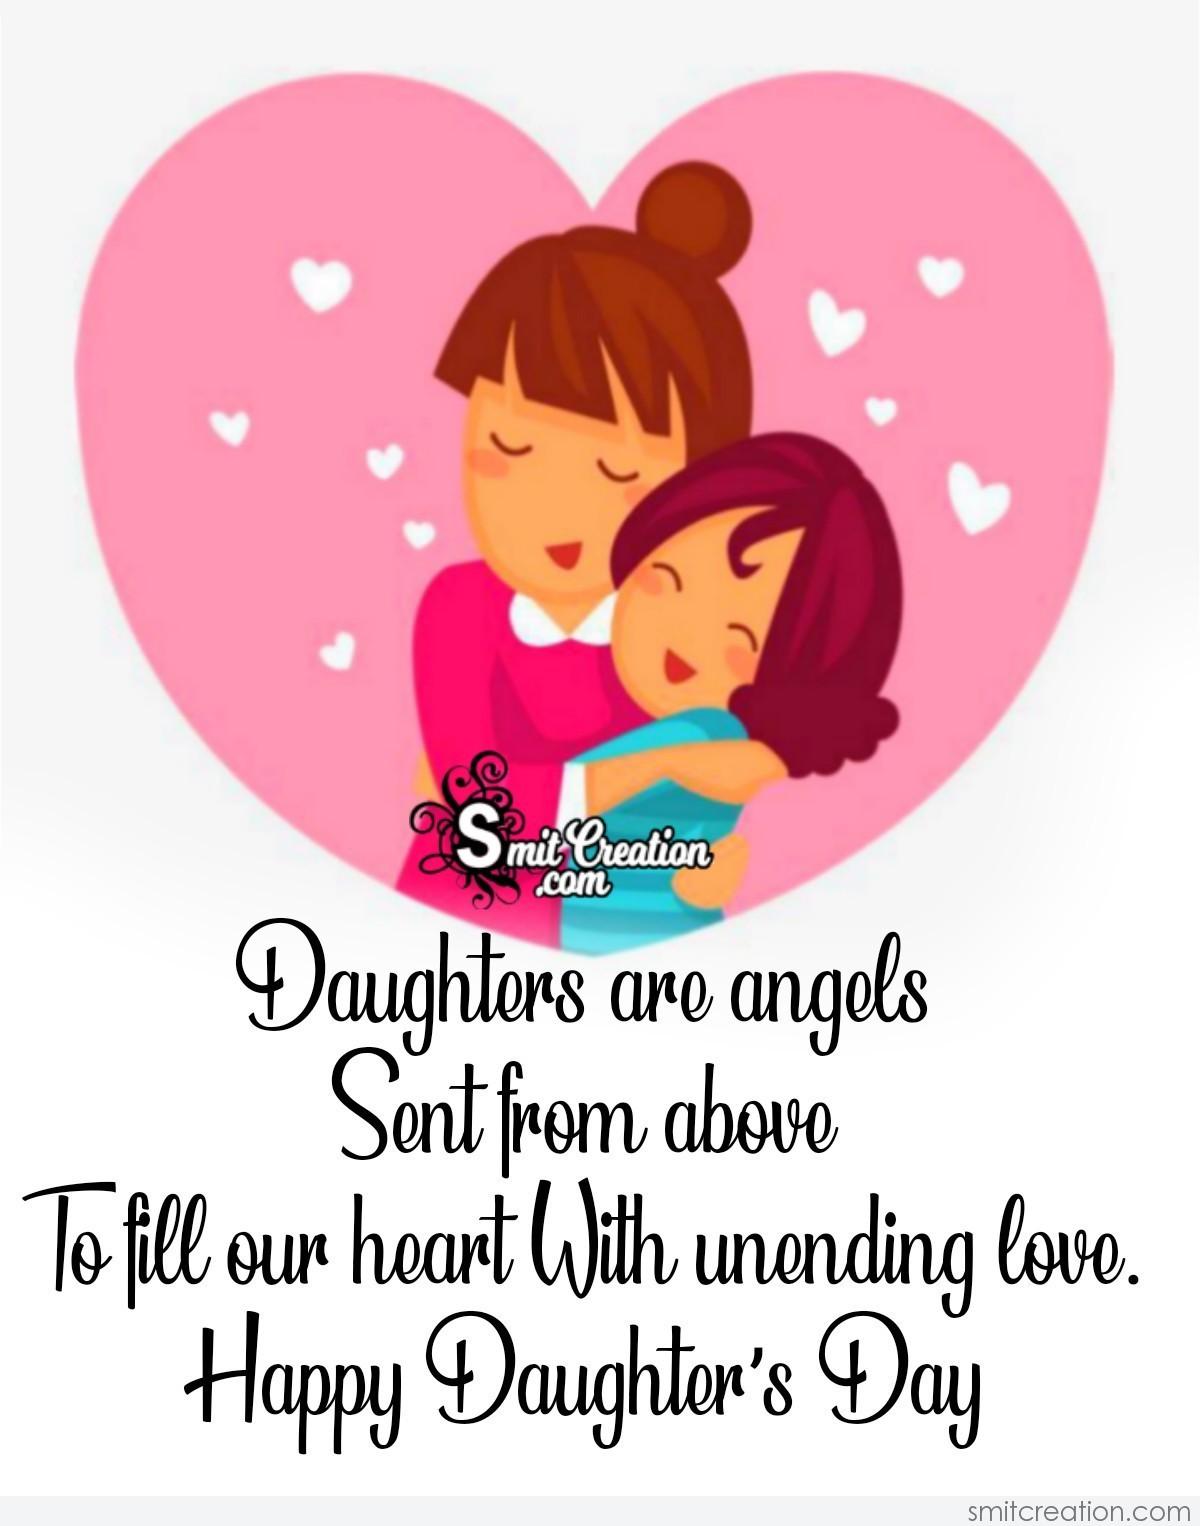 Happy Daughter’s Day Quote Wishes - SmitCreation.com